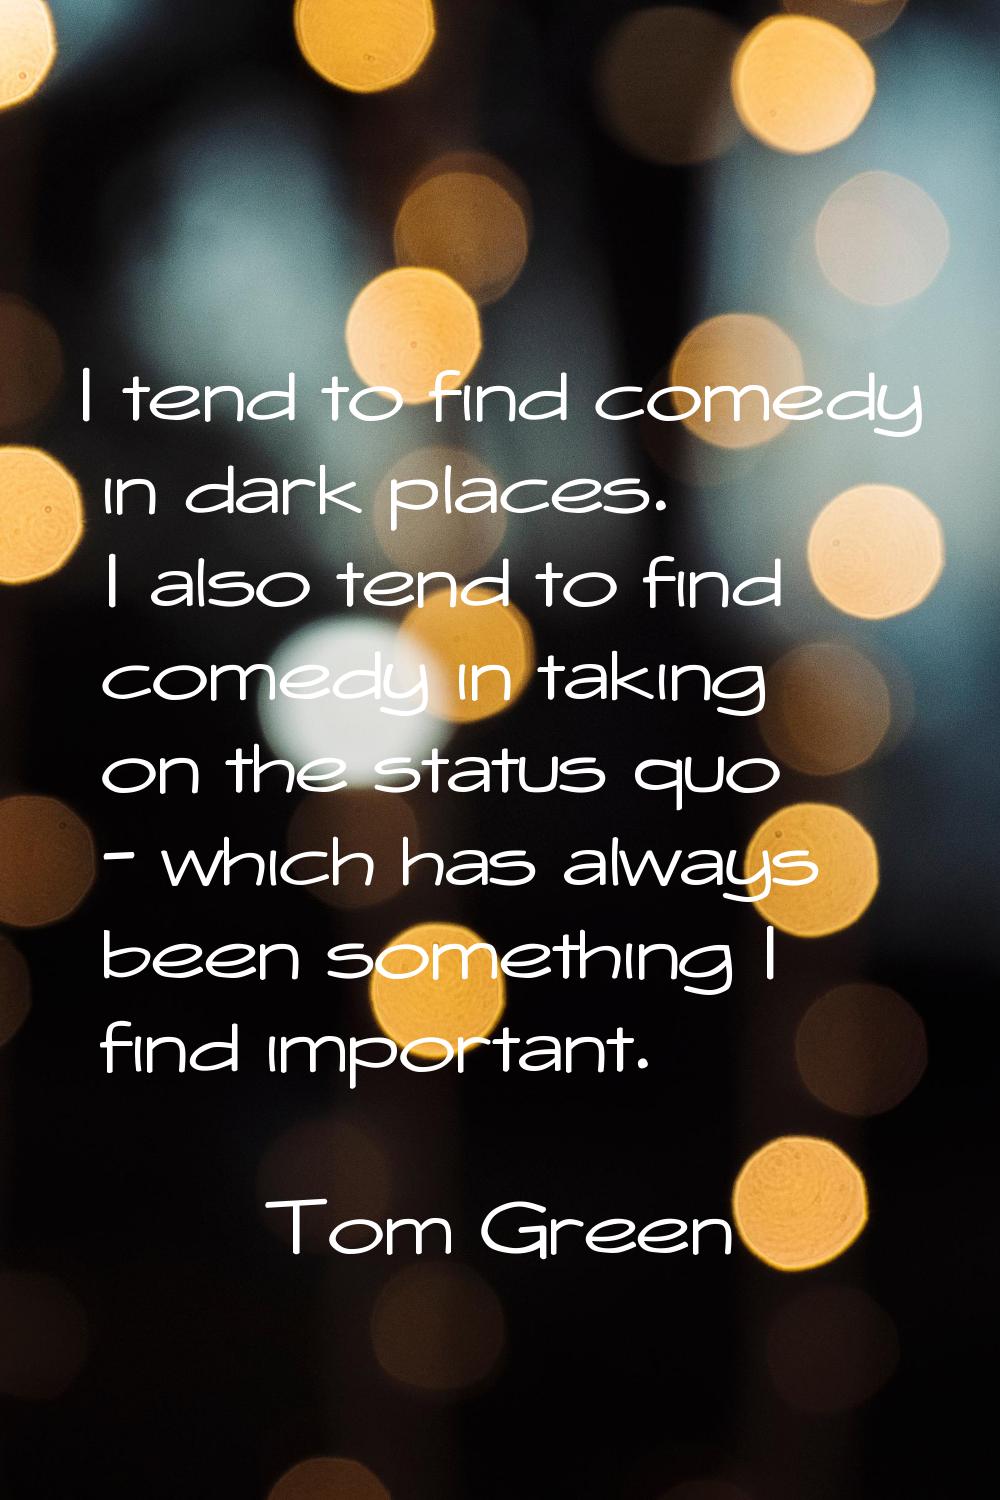 I tend to find comedy in dark places. I also tend to find comedy in taking on the status quo - whic